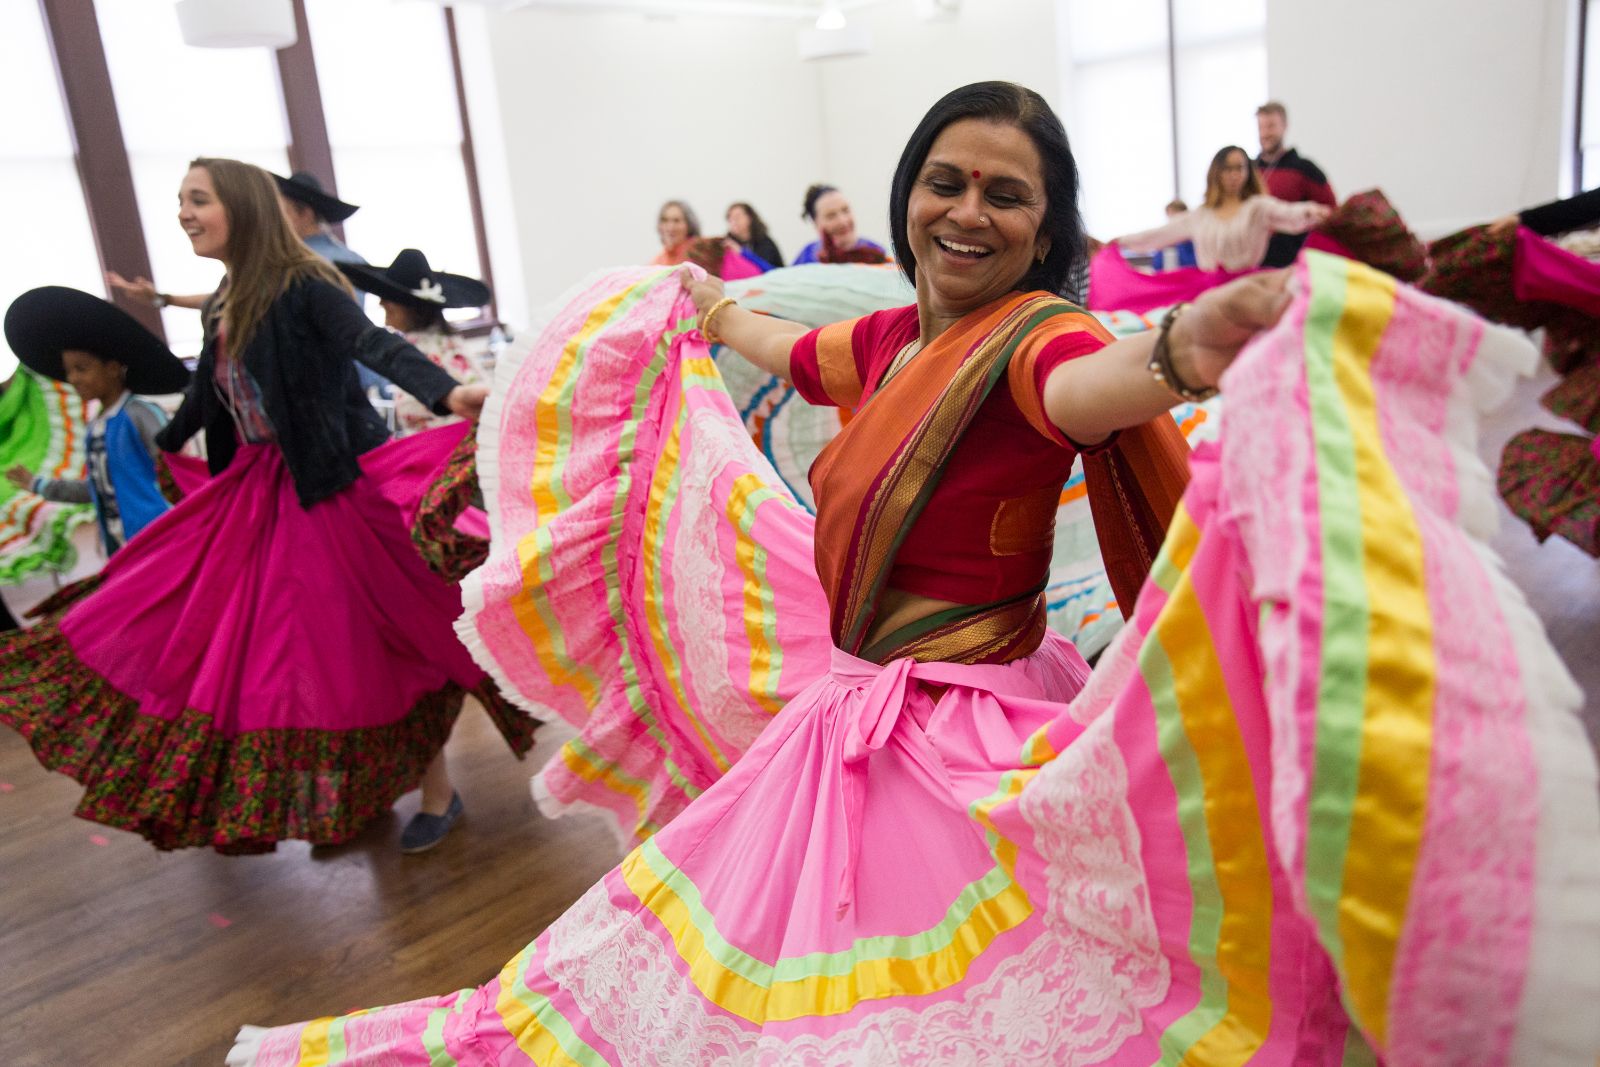 A smiling dancer wearing a large, pink ruffled skirt holds the folds of the skir